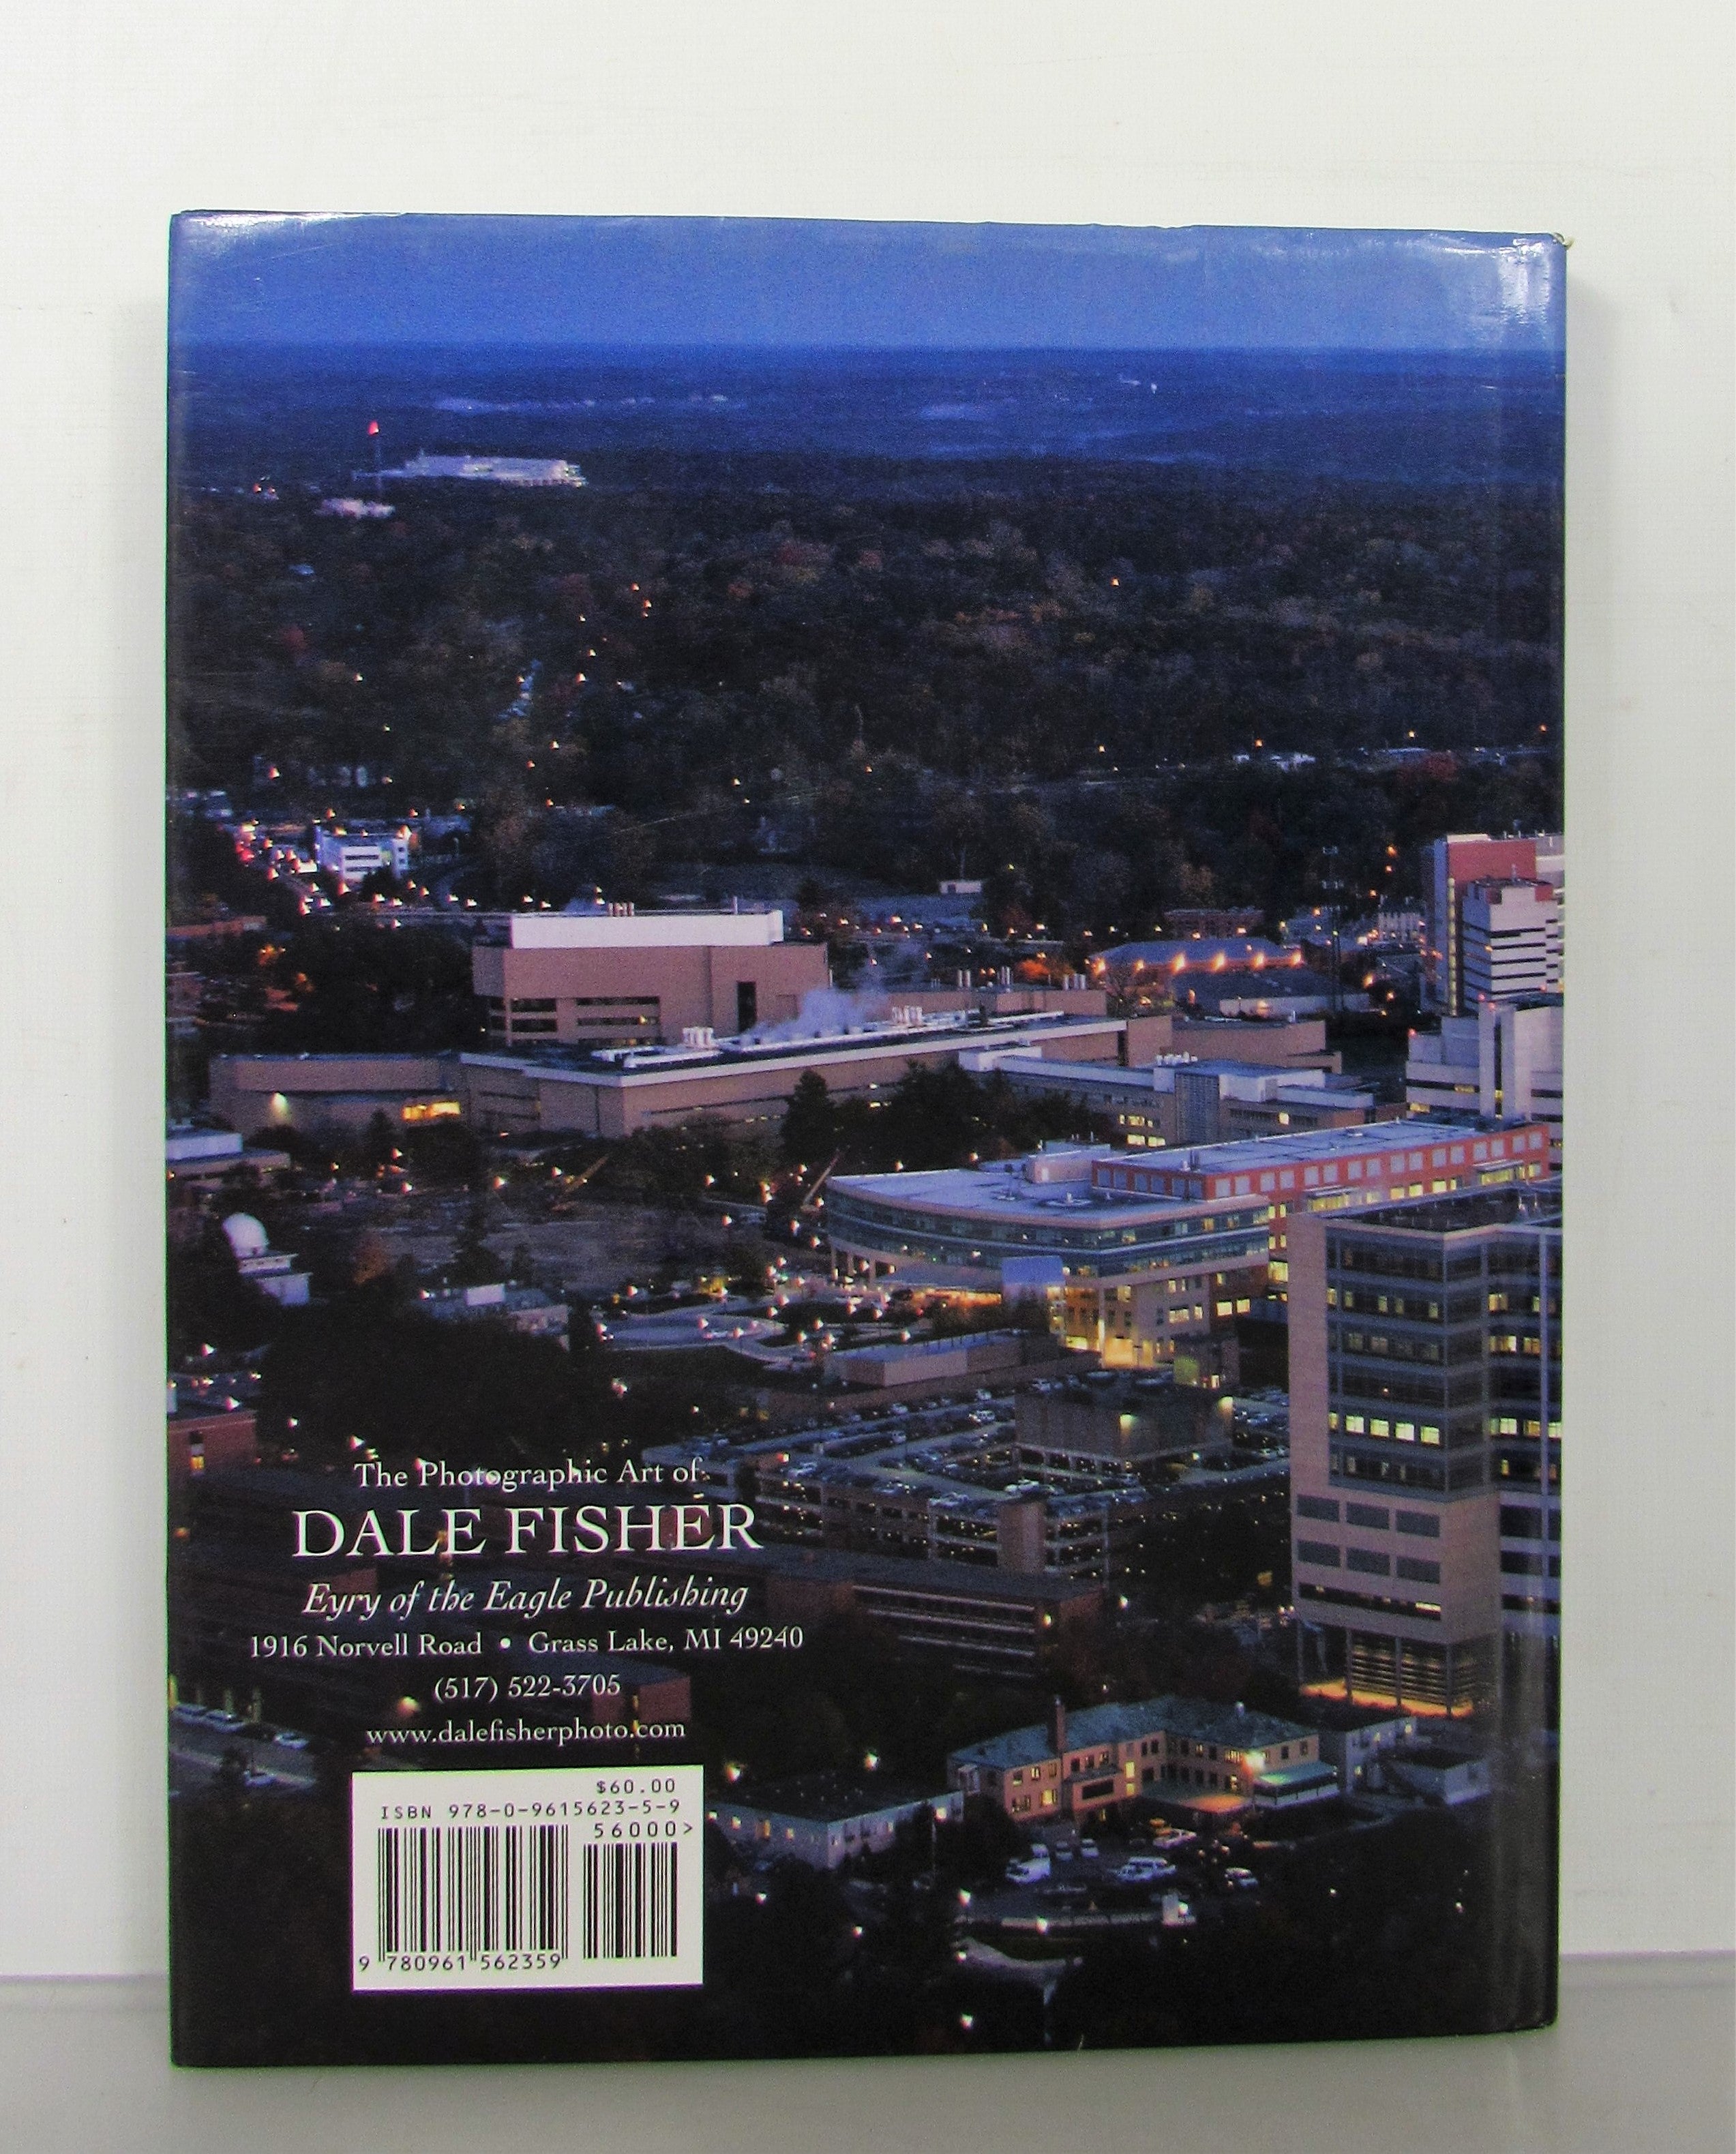 Ann Arbor: Visions of the Eagle III by Dale Fisher